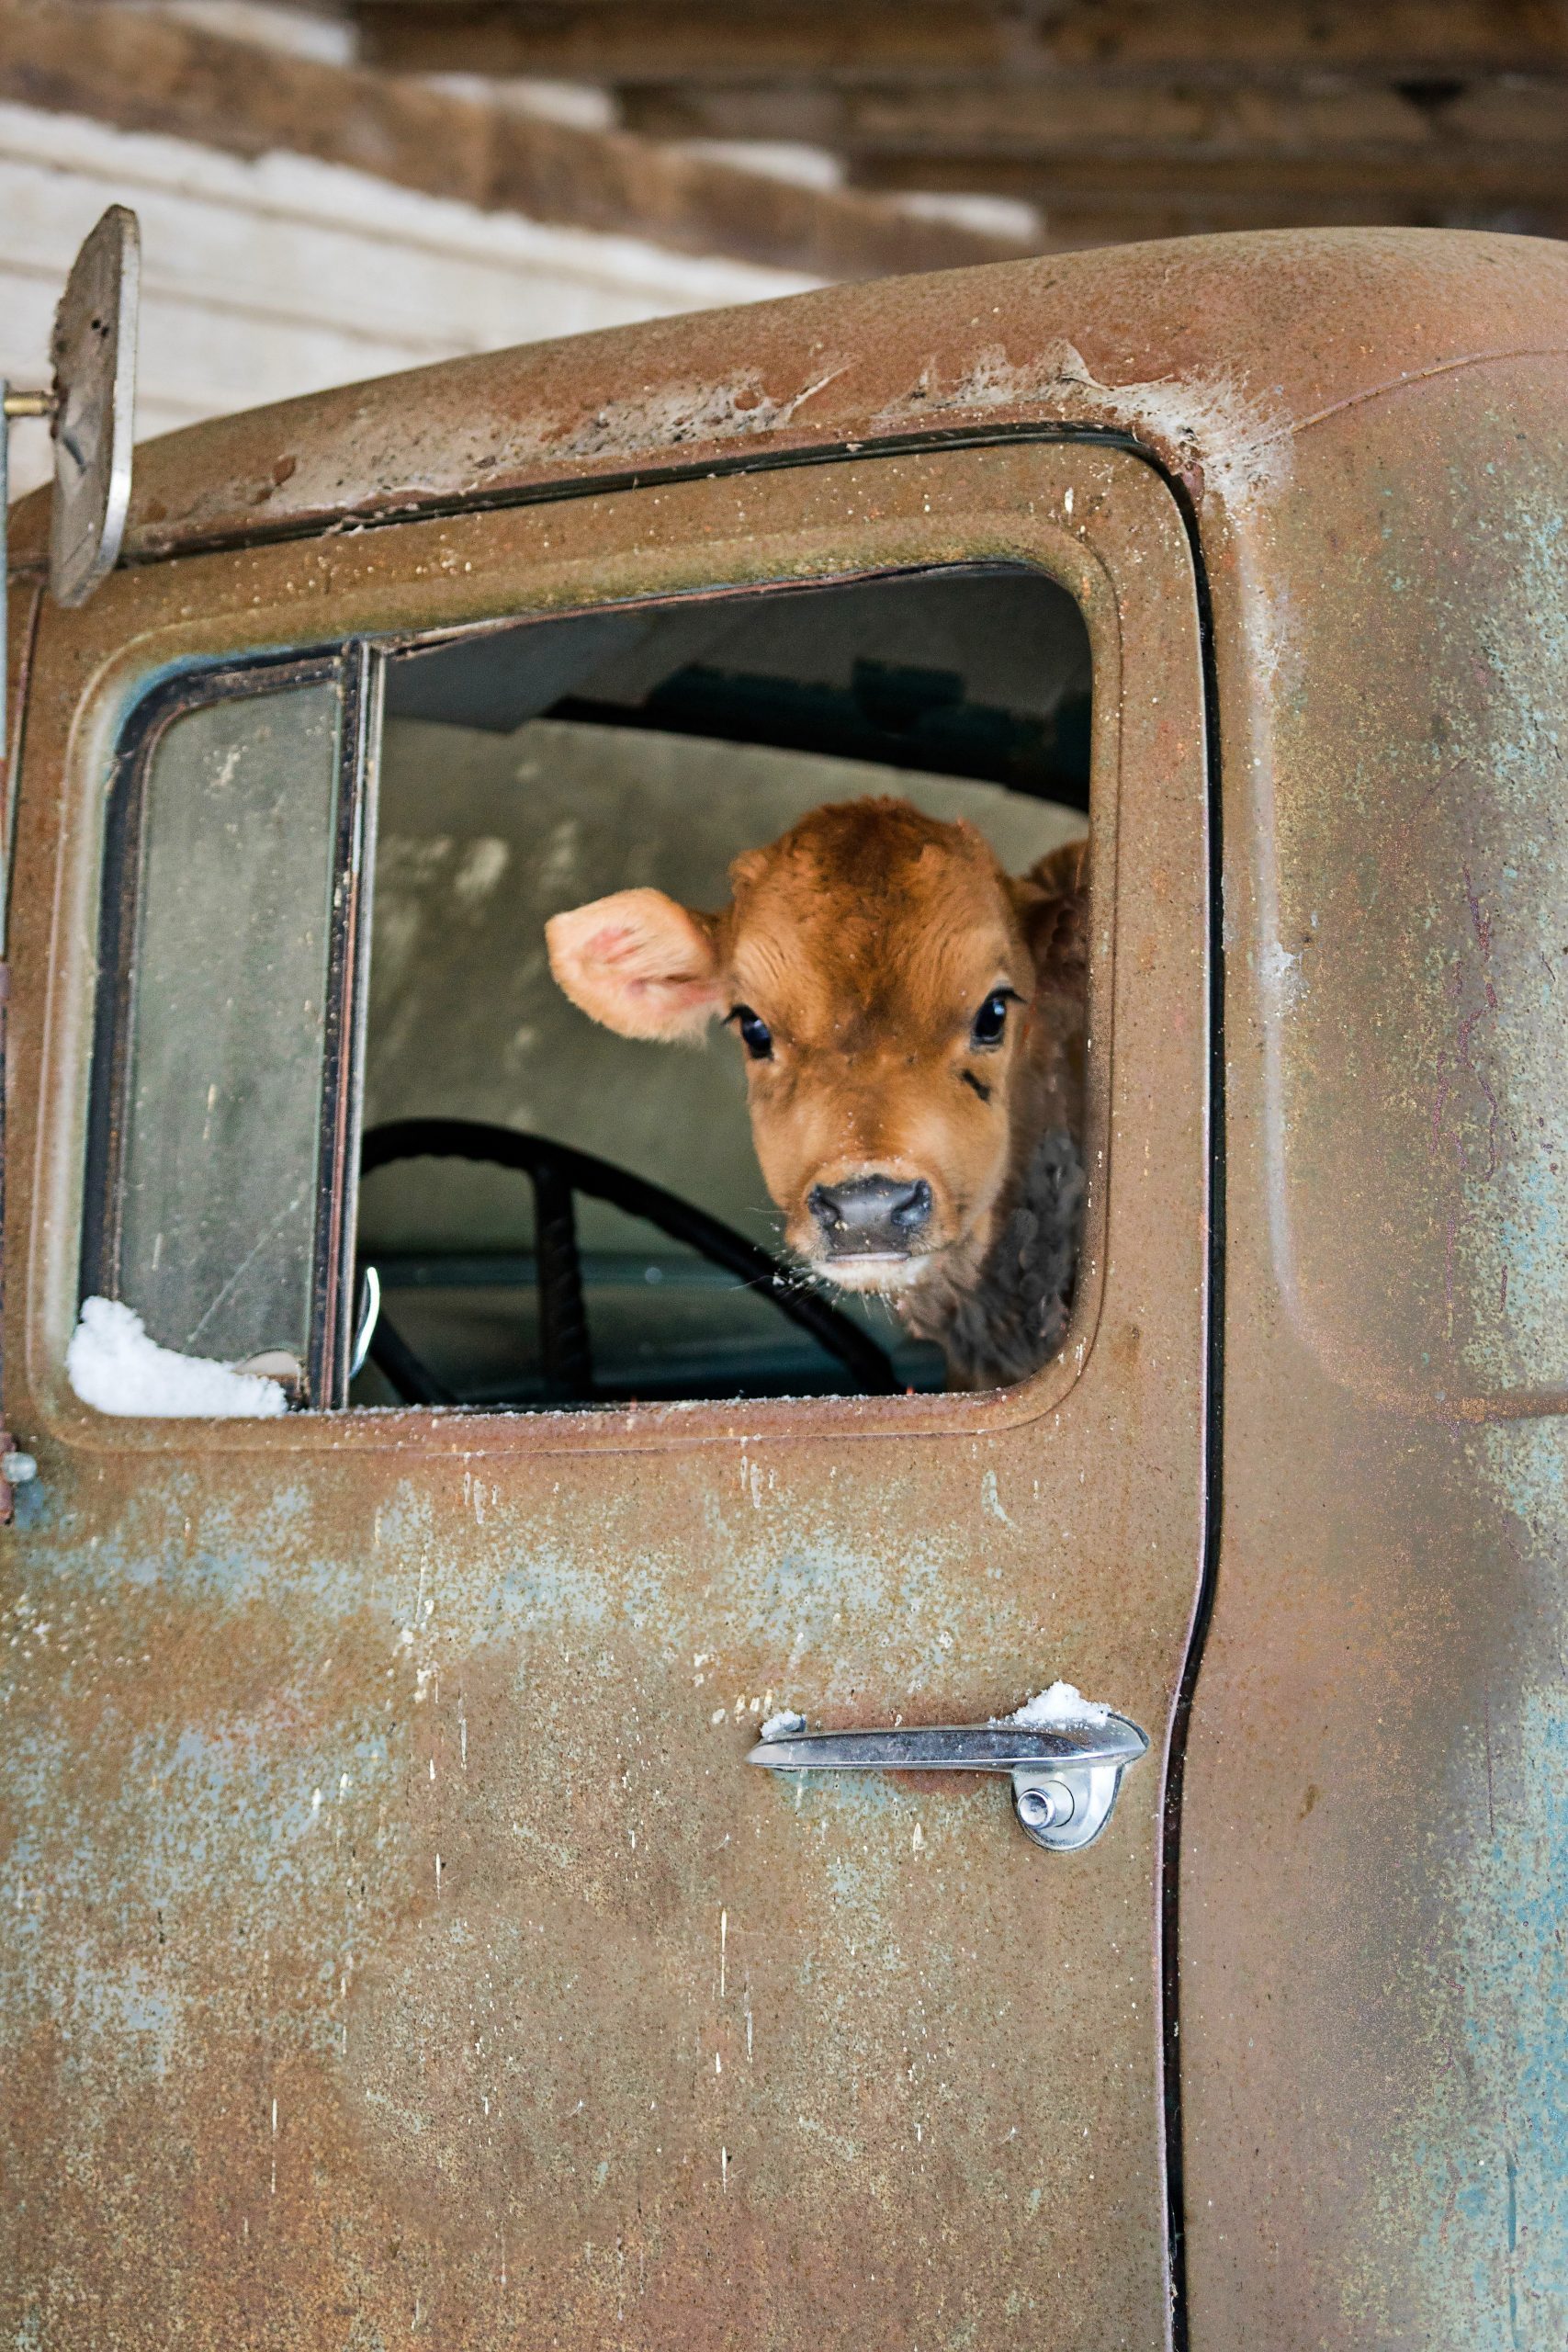 a small cow looks out the window from the cab of an old truck